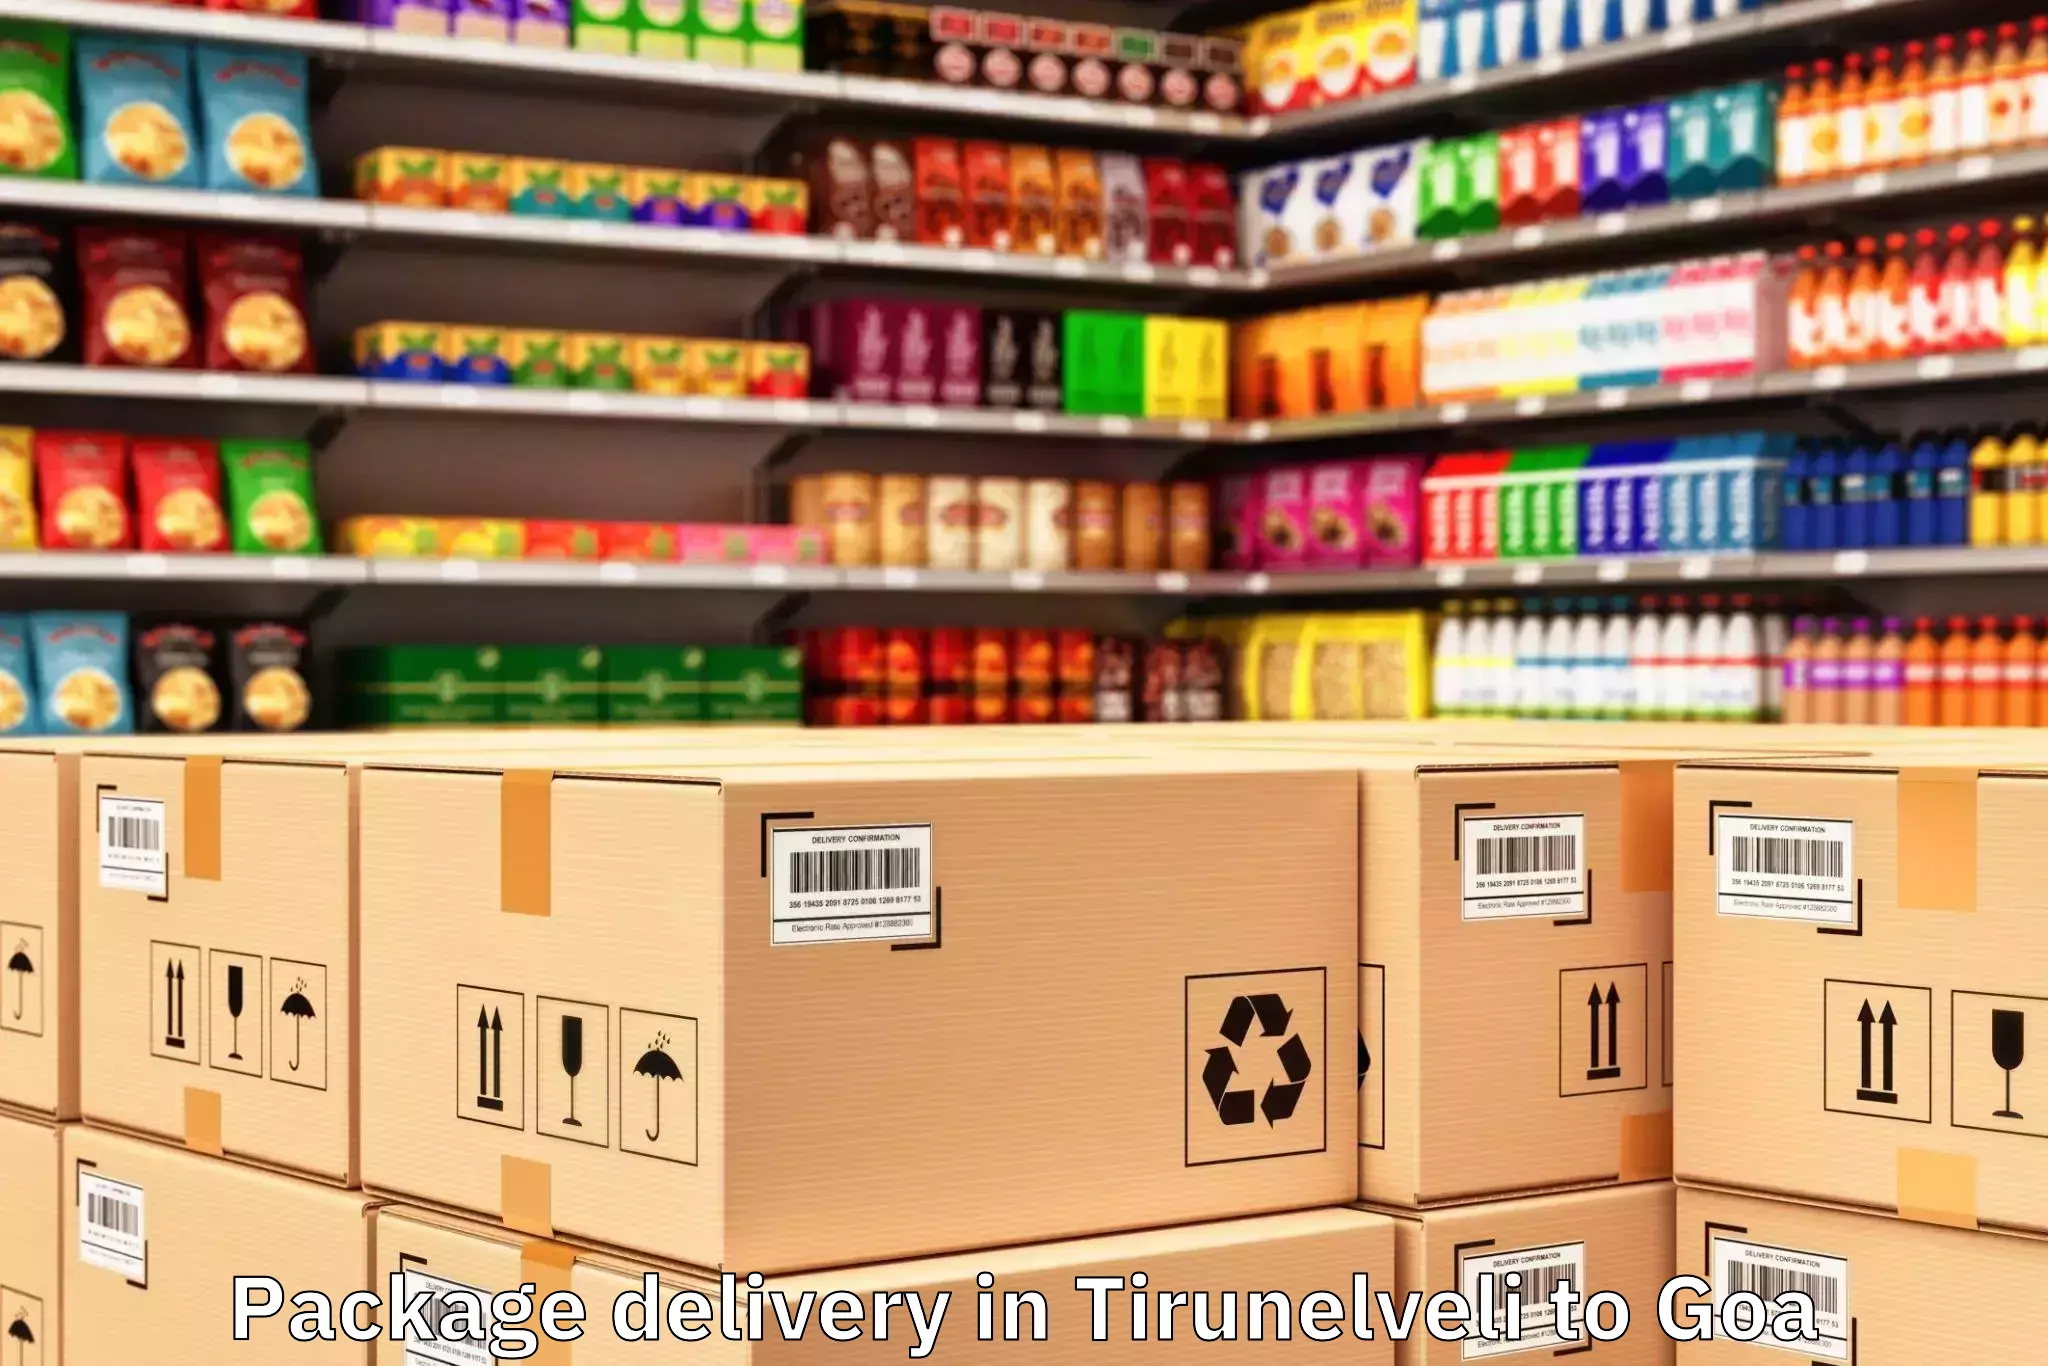 Efficient Tirunelveli to Pilerne Package Delivery